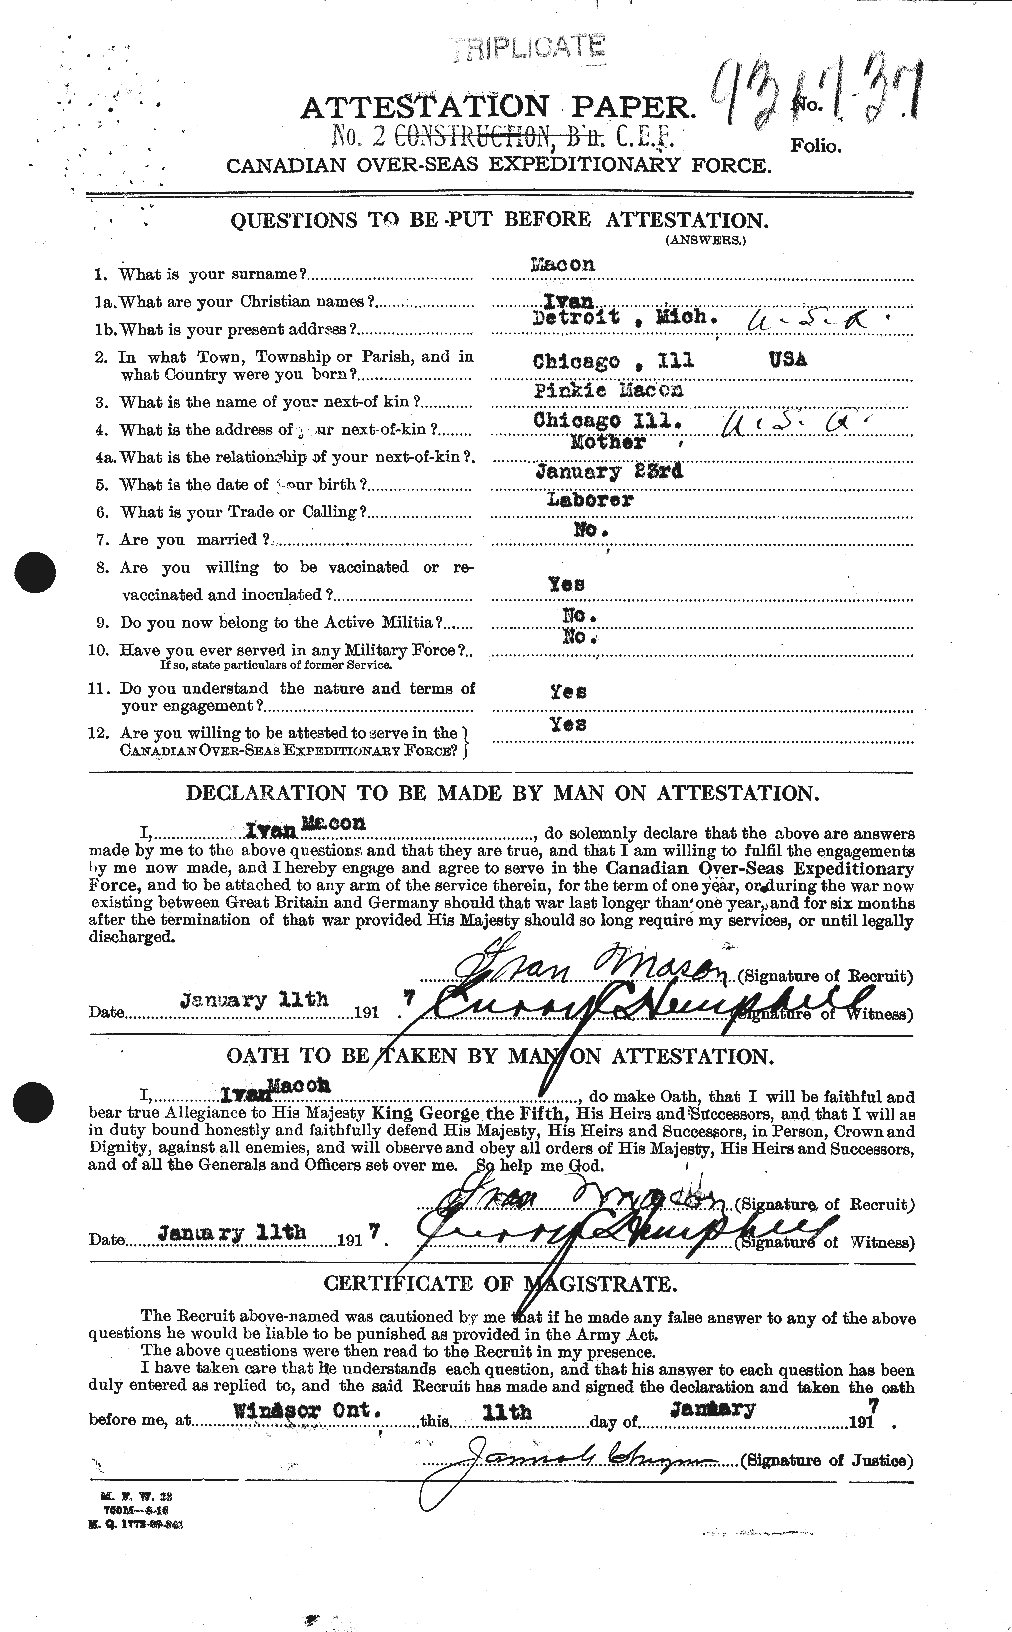 Personnel Records of the First World War - CEF 476455a